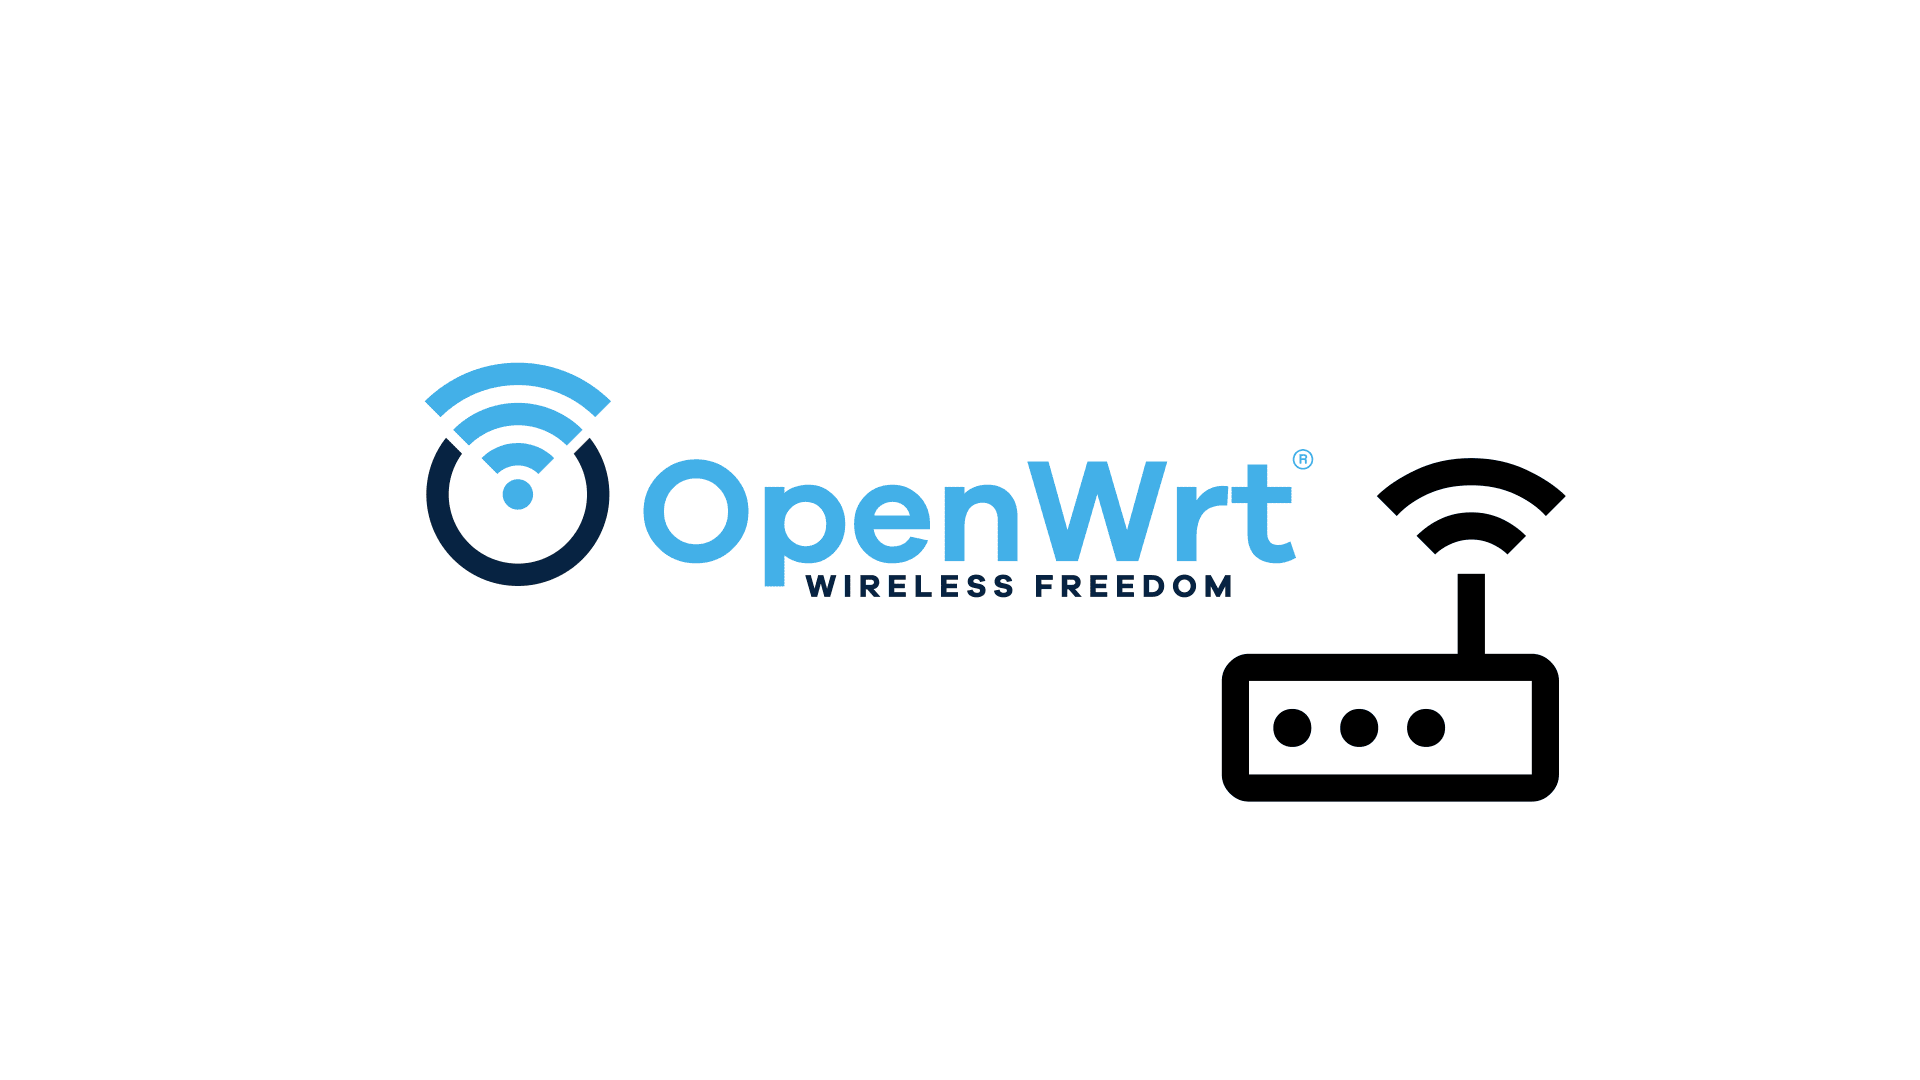 A simple way to improve the stability of your OpenWrt router